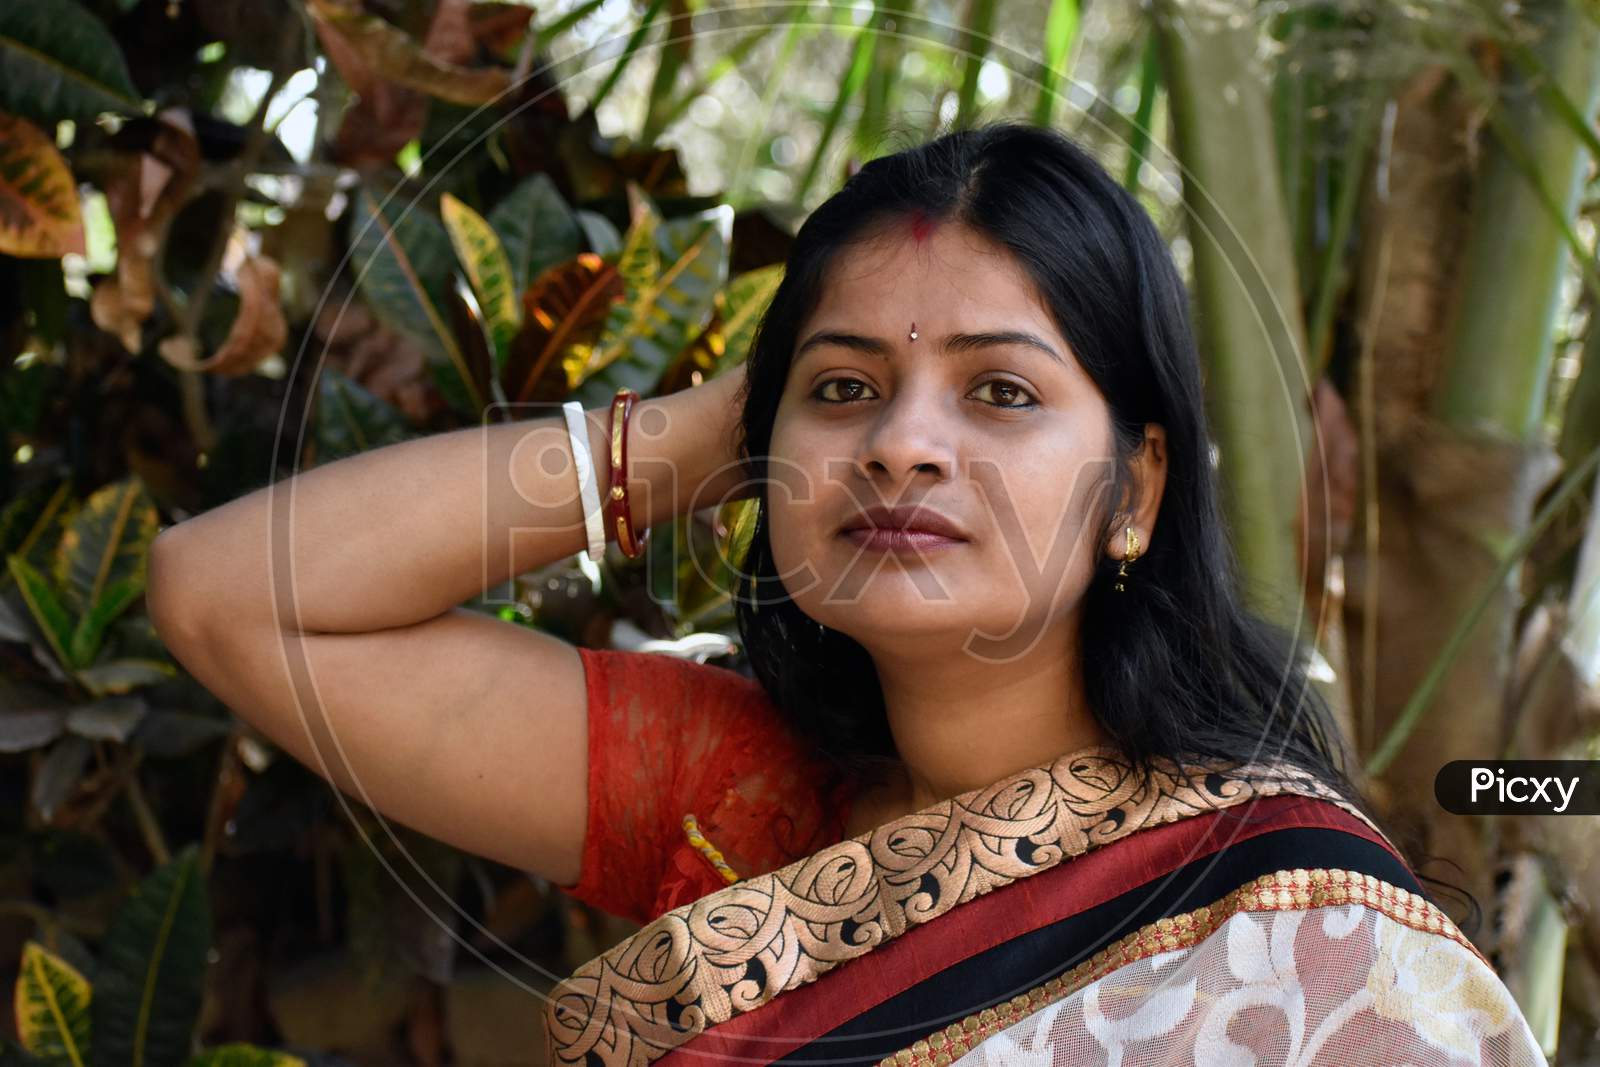 The Indian Housewife In The Casual Clothing On A Forest Background